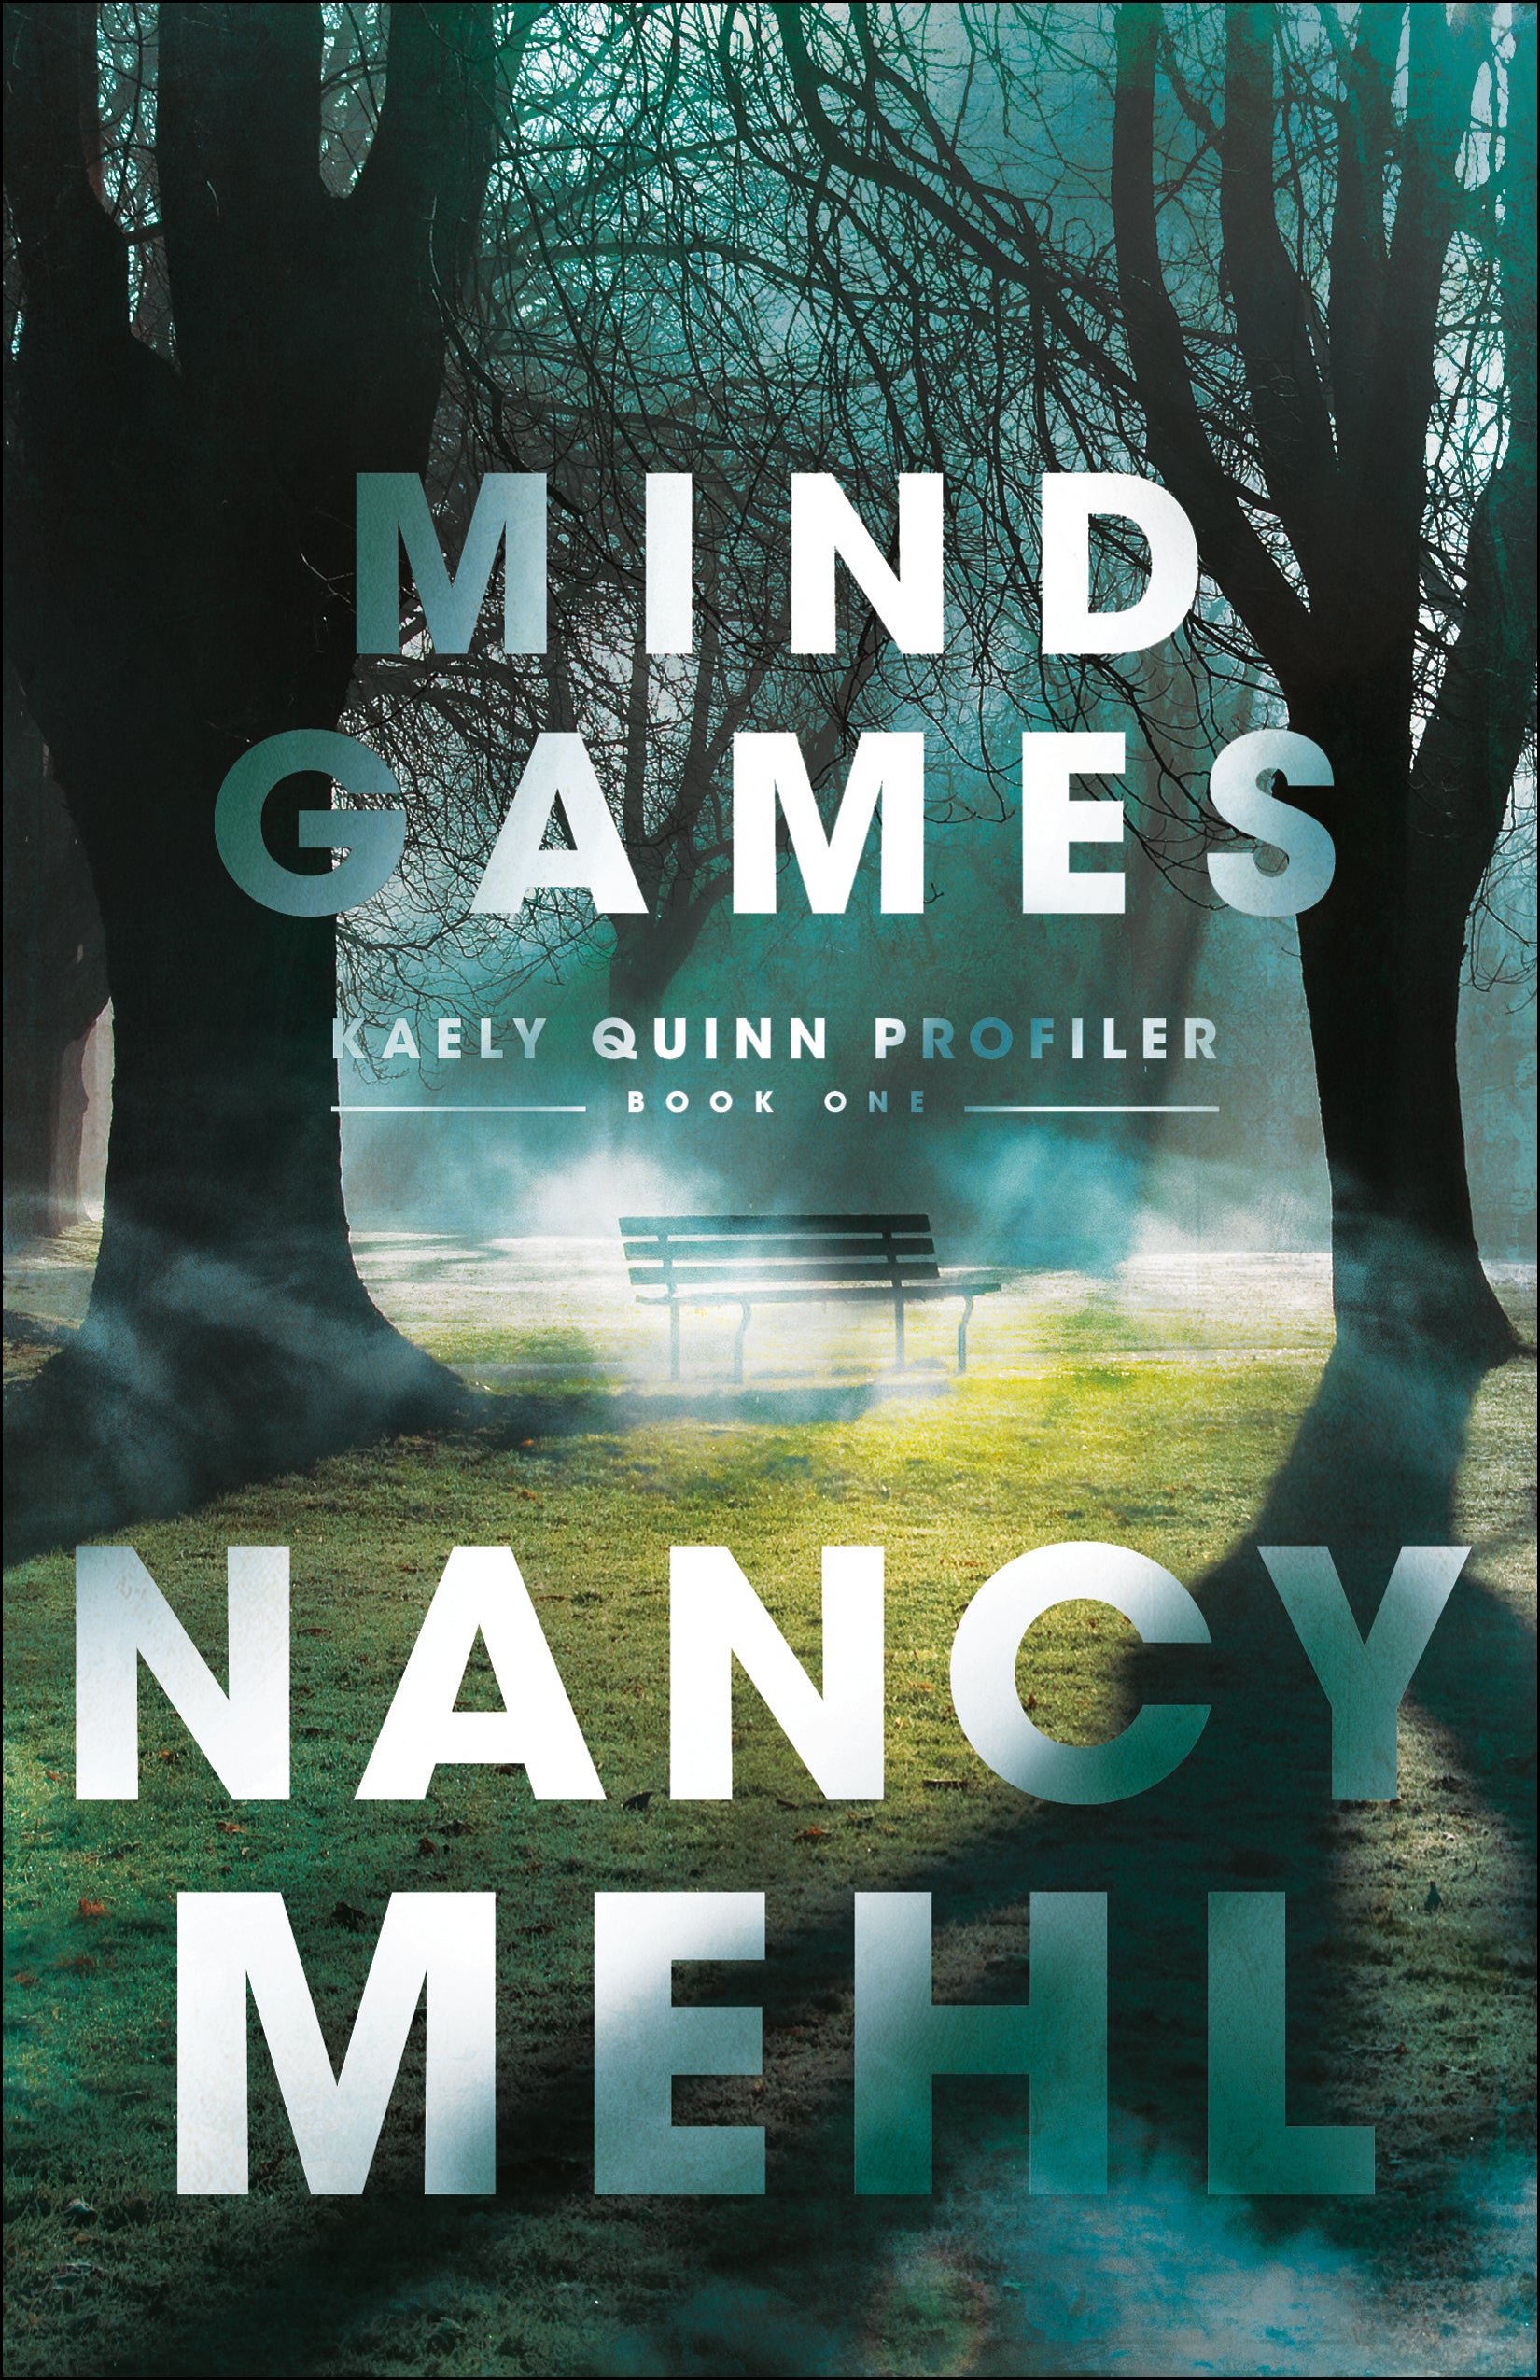 Image of Mind Games other